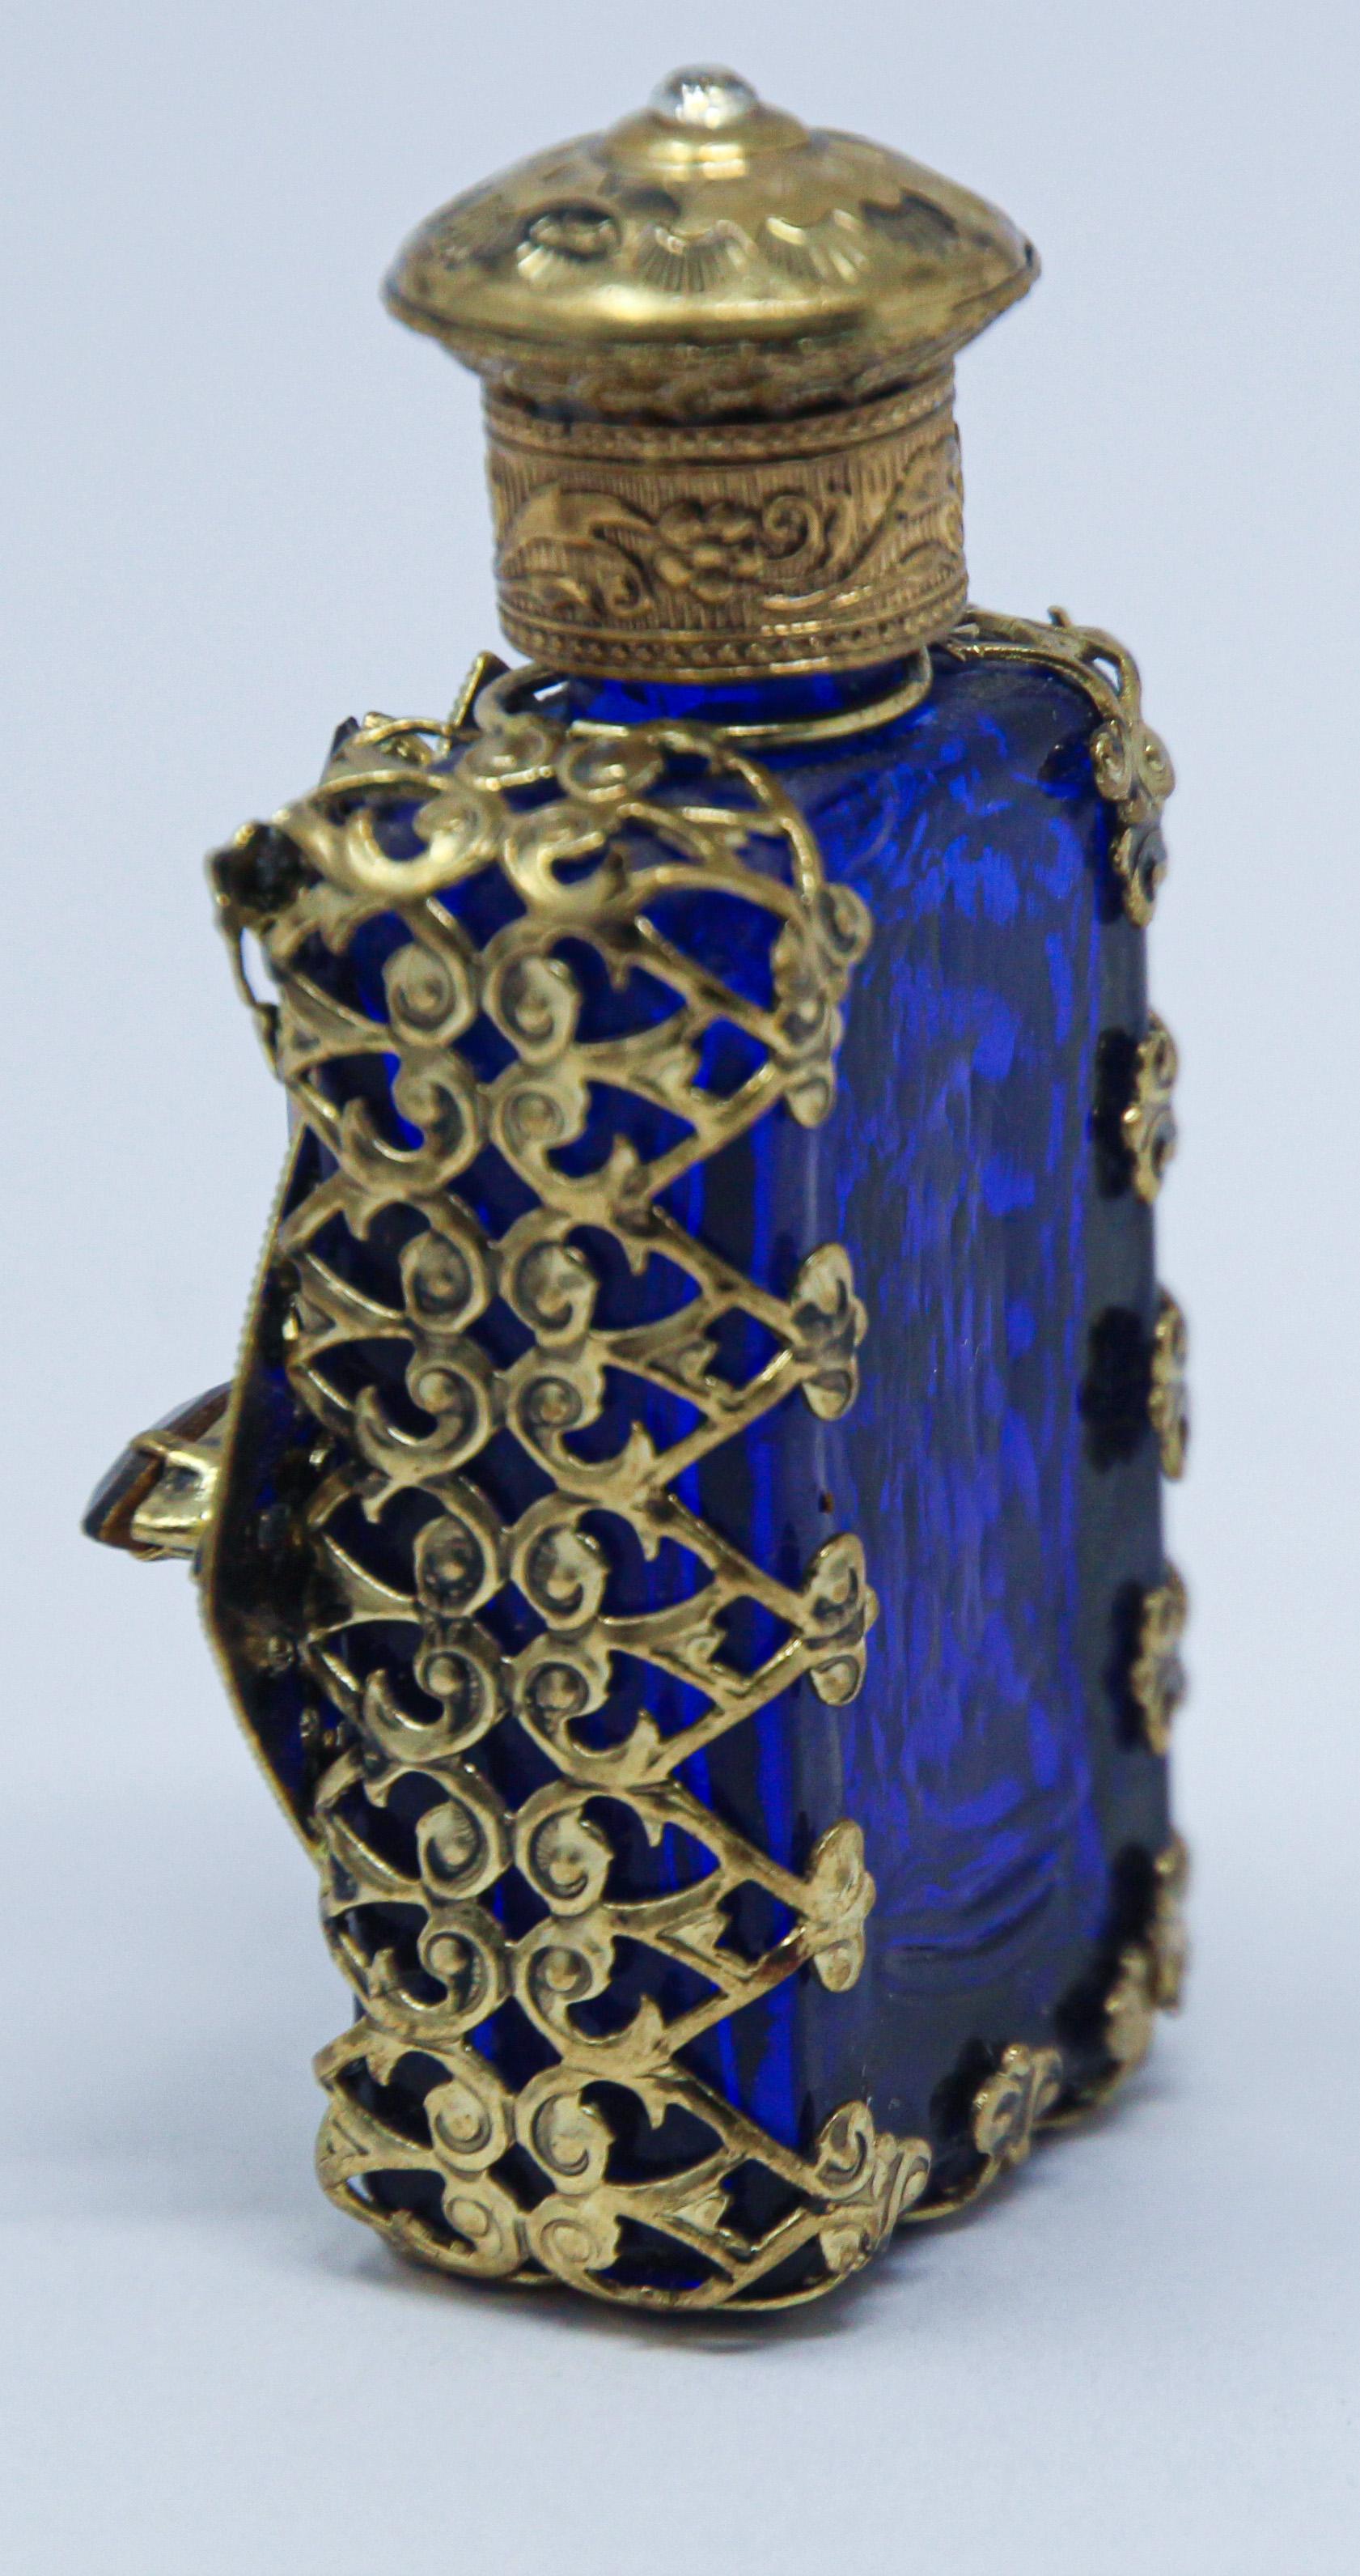 Pressed blue glass perfume bottle with a jeweled filigree sleeve.
Hollywood Regency pressed glass vanity perfume bottle with stopper.
The bottle features an ornate gold toned filigree collar and front panel with small inlaid beads of colored